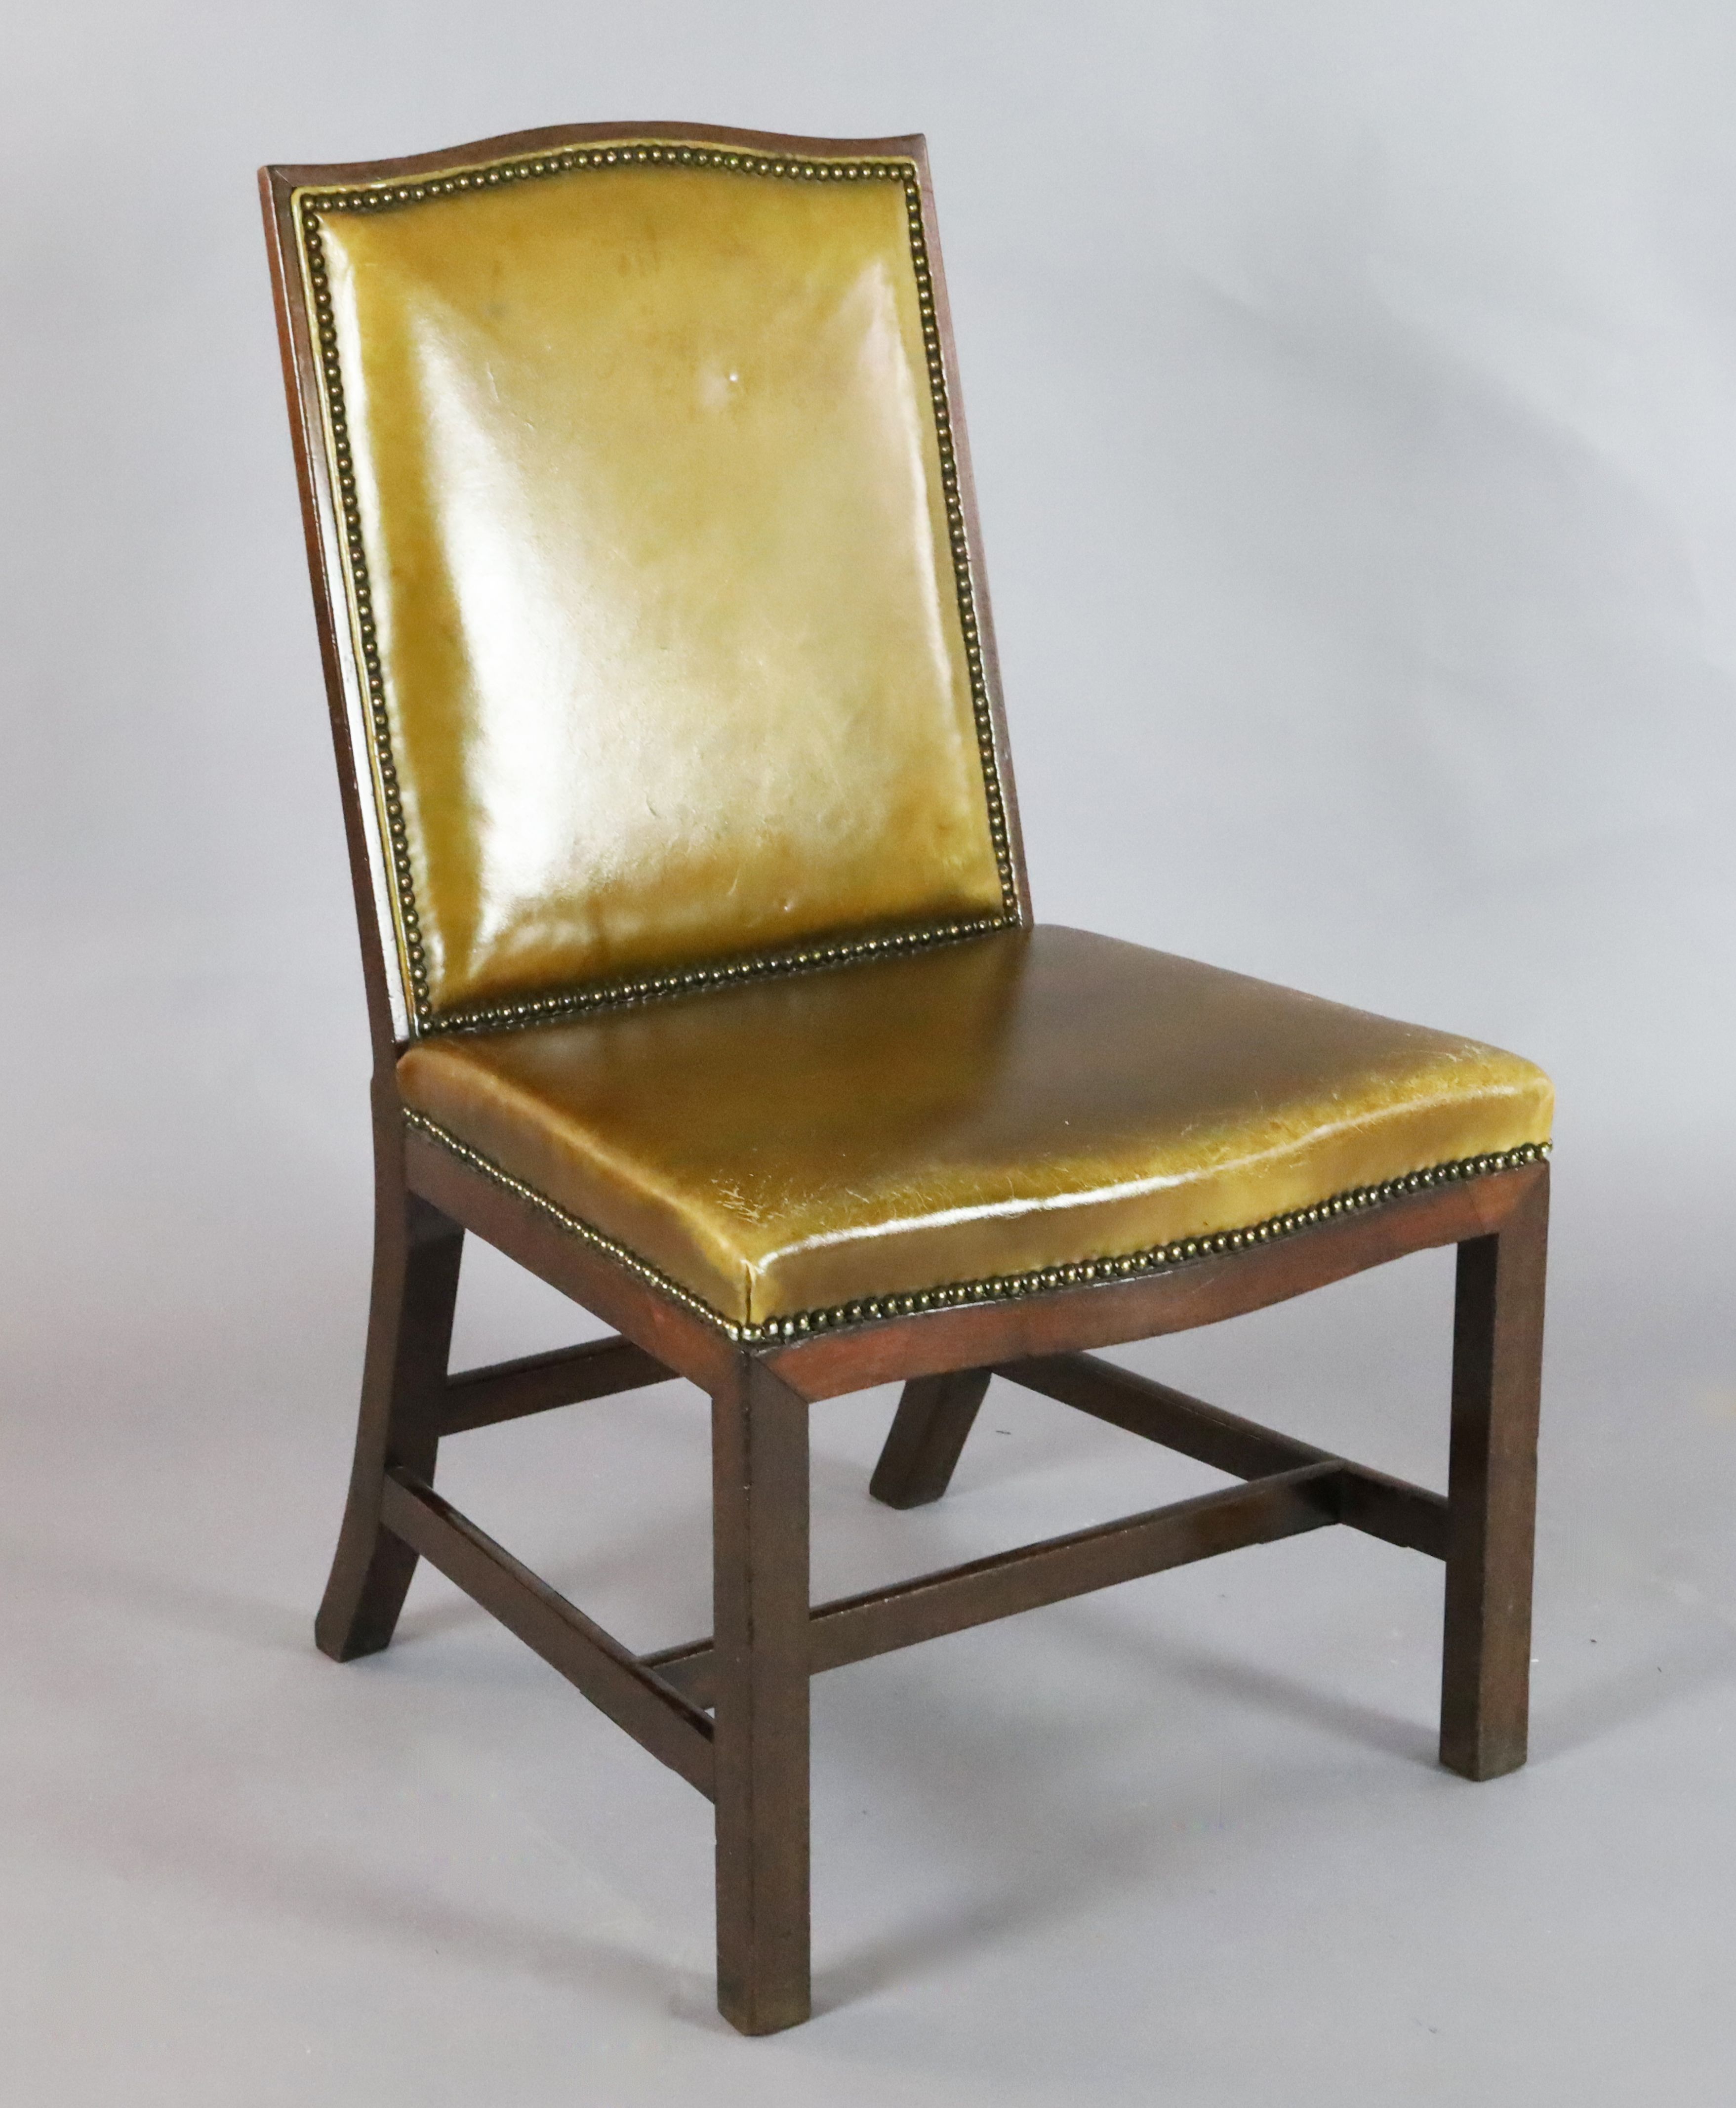 A George III style mahogany desk chair, with pale green leather upholstery, on chamfered squared